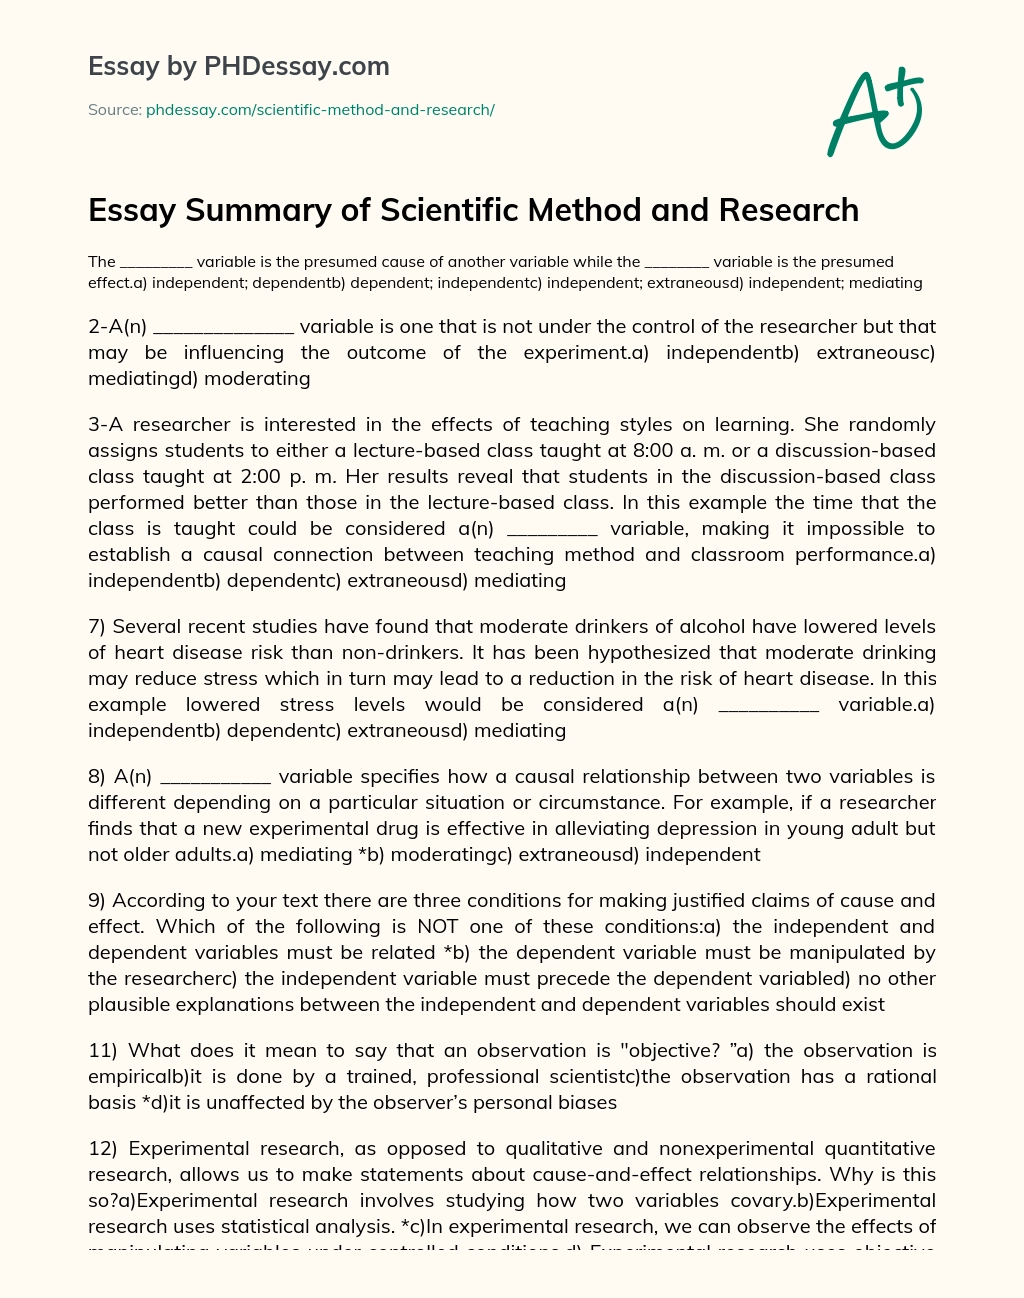 how to write an scientific method essay